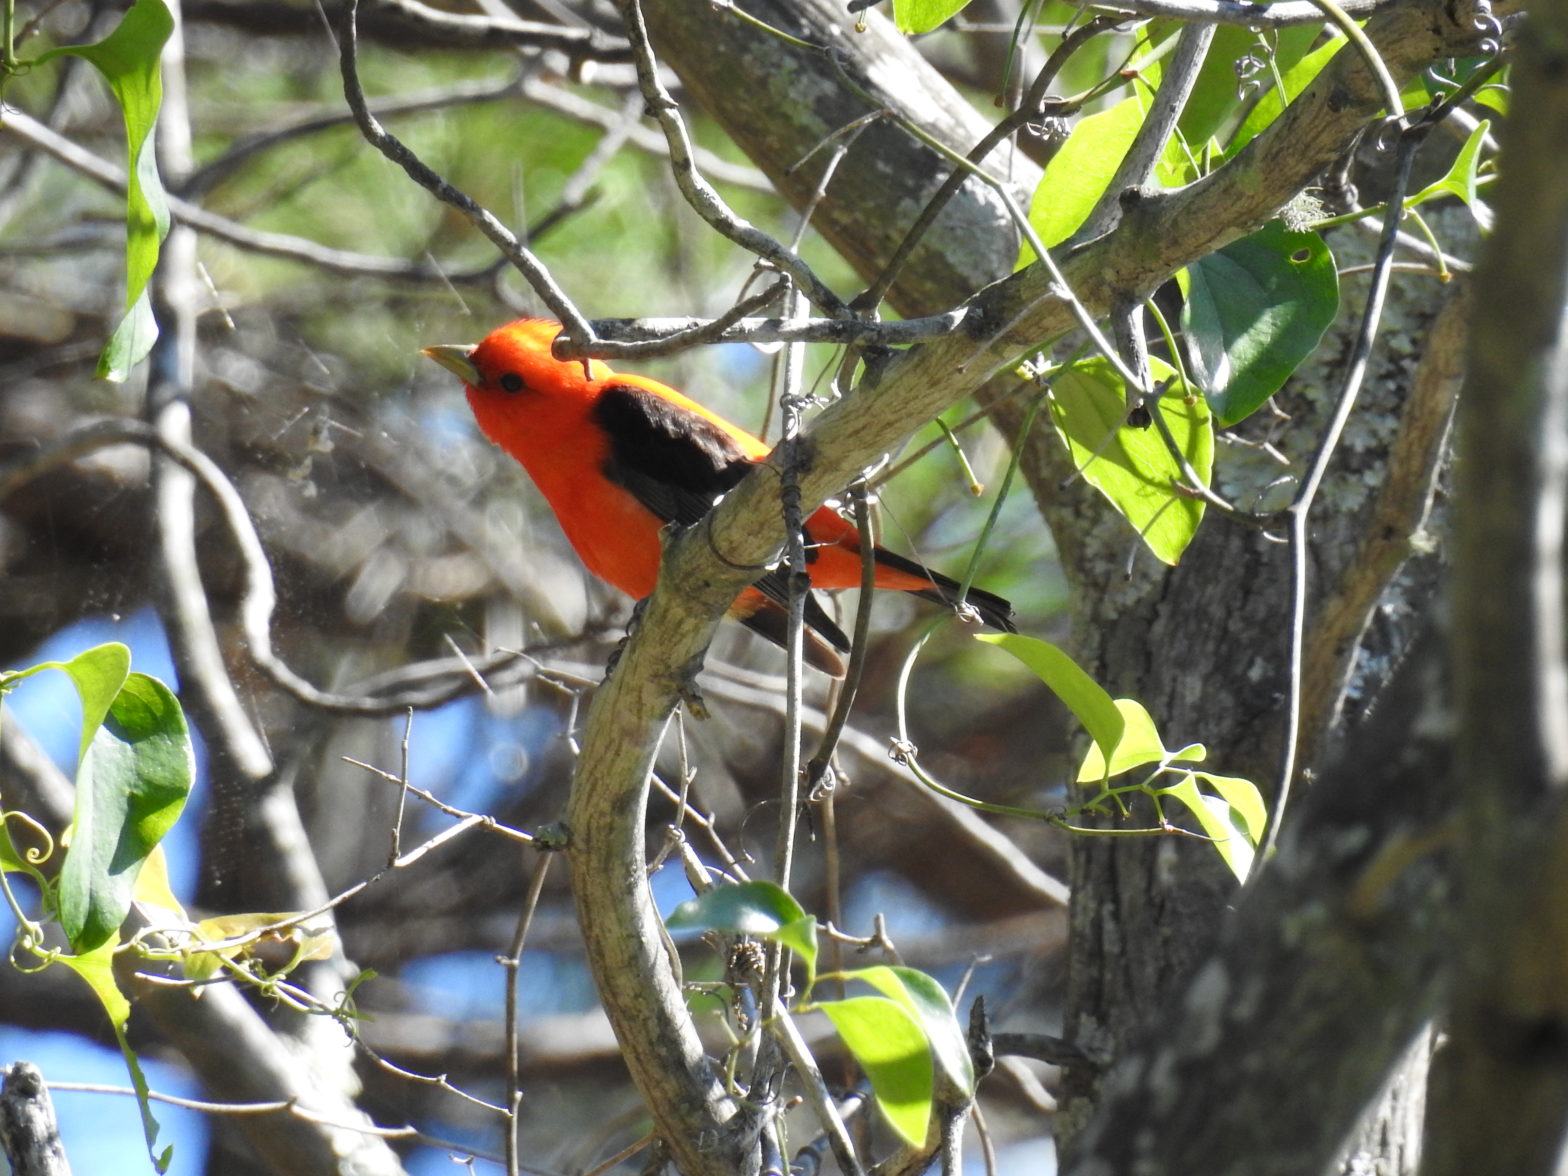 Episode 5: Scarlet Tanager and the End of the Season